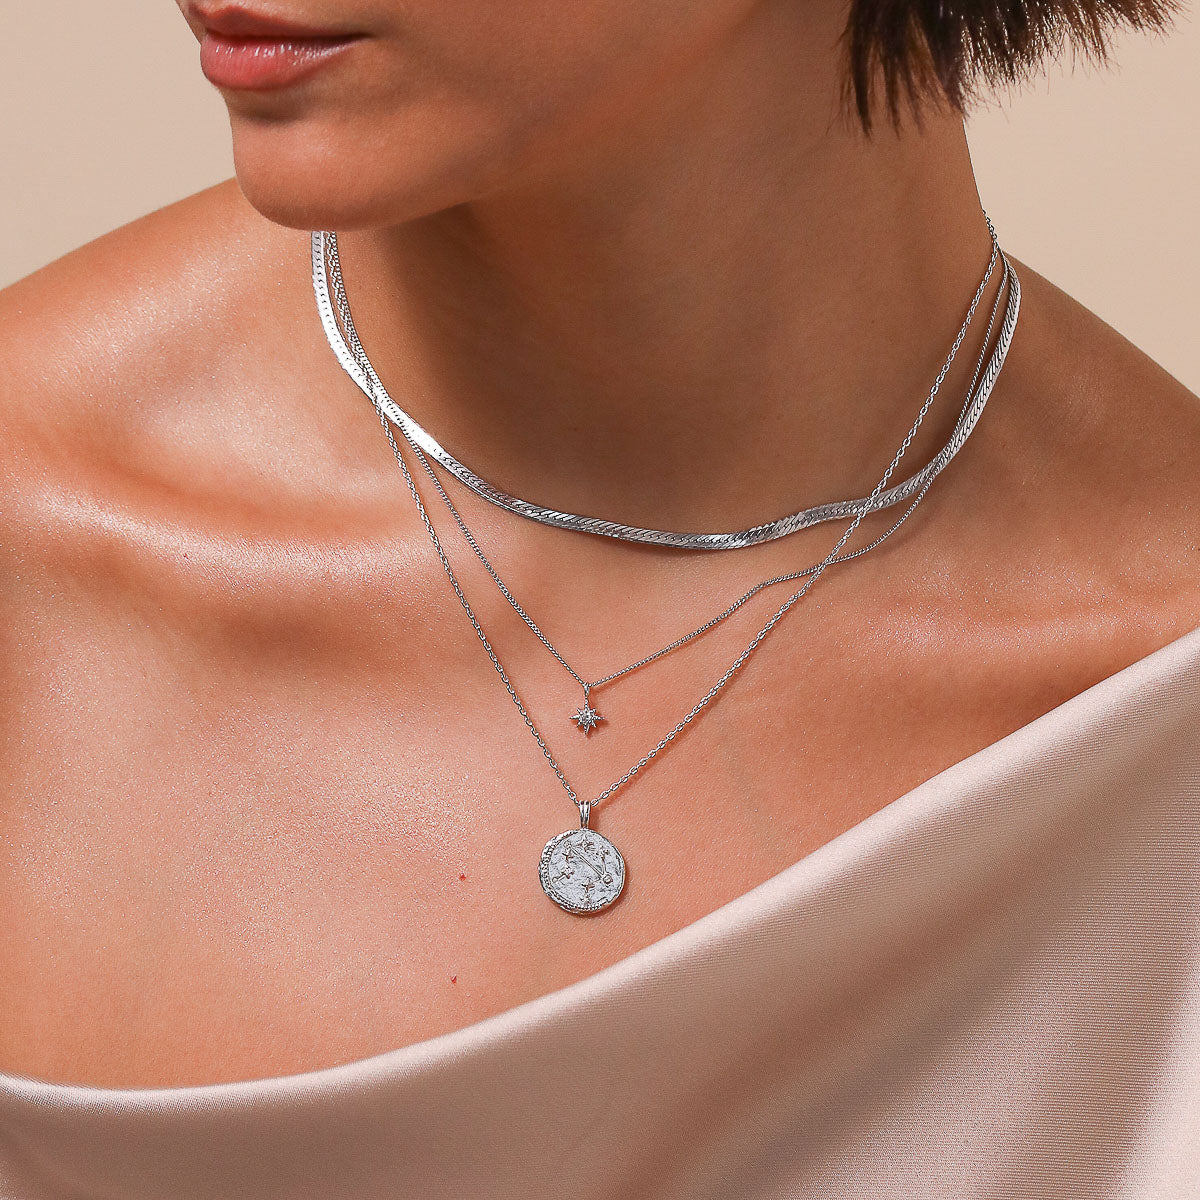 Libra Zodiac Pendant Necklace in Silver worn layered with necklaces